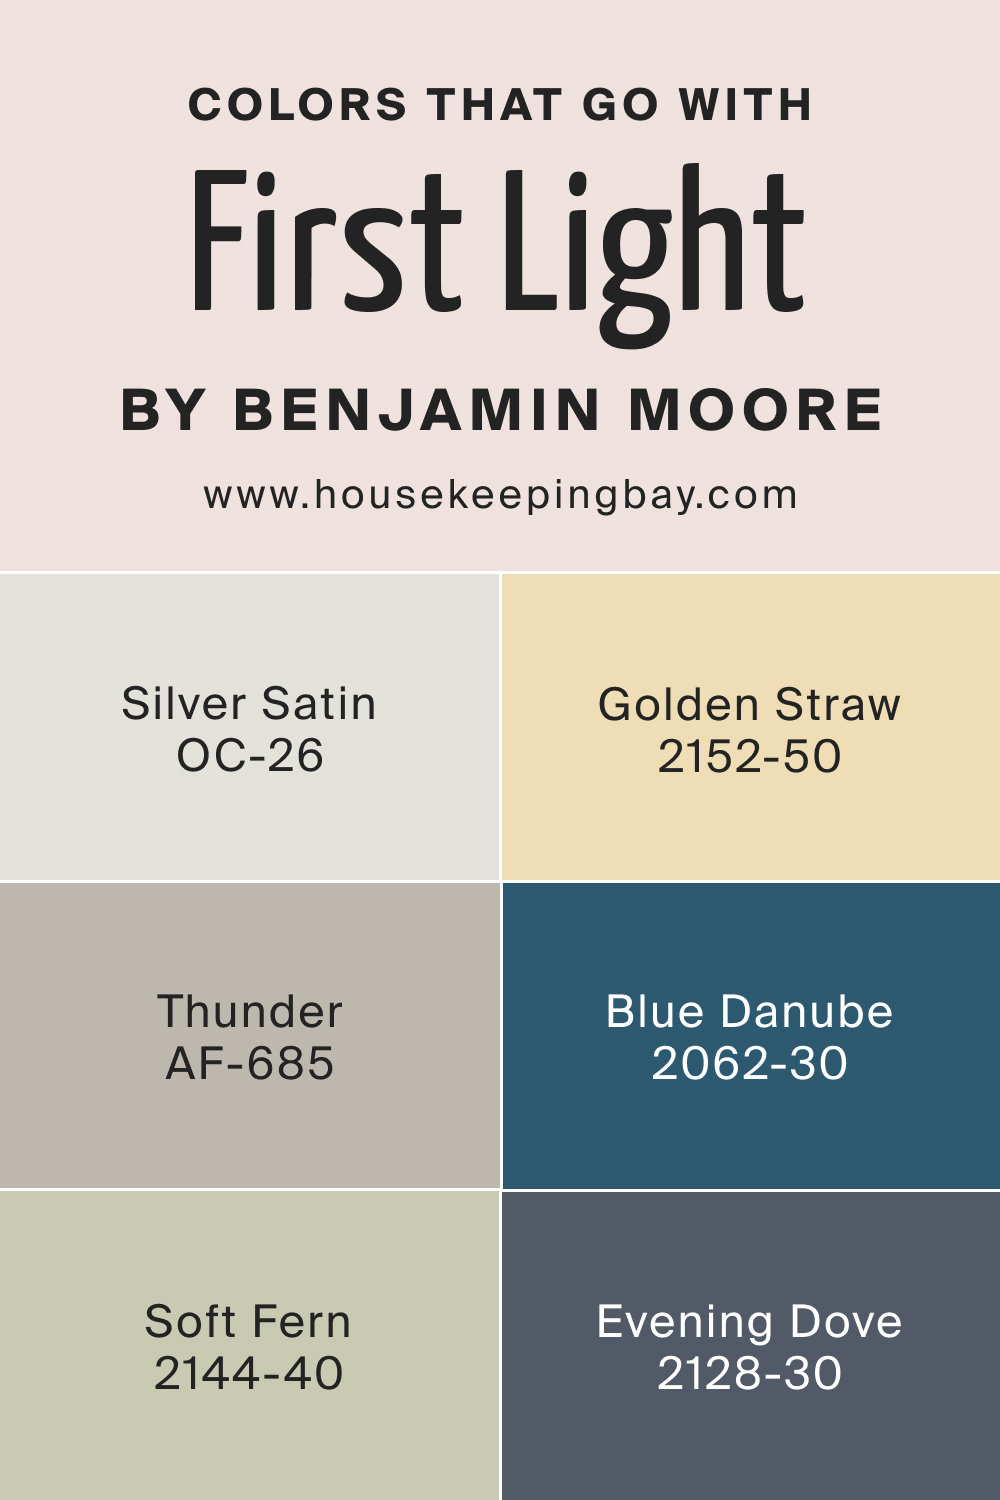 Colors that goes with First Light 2102 70 by Benjamin Moore